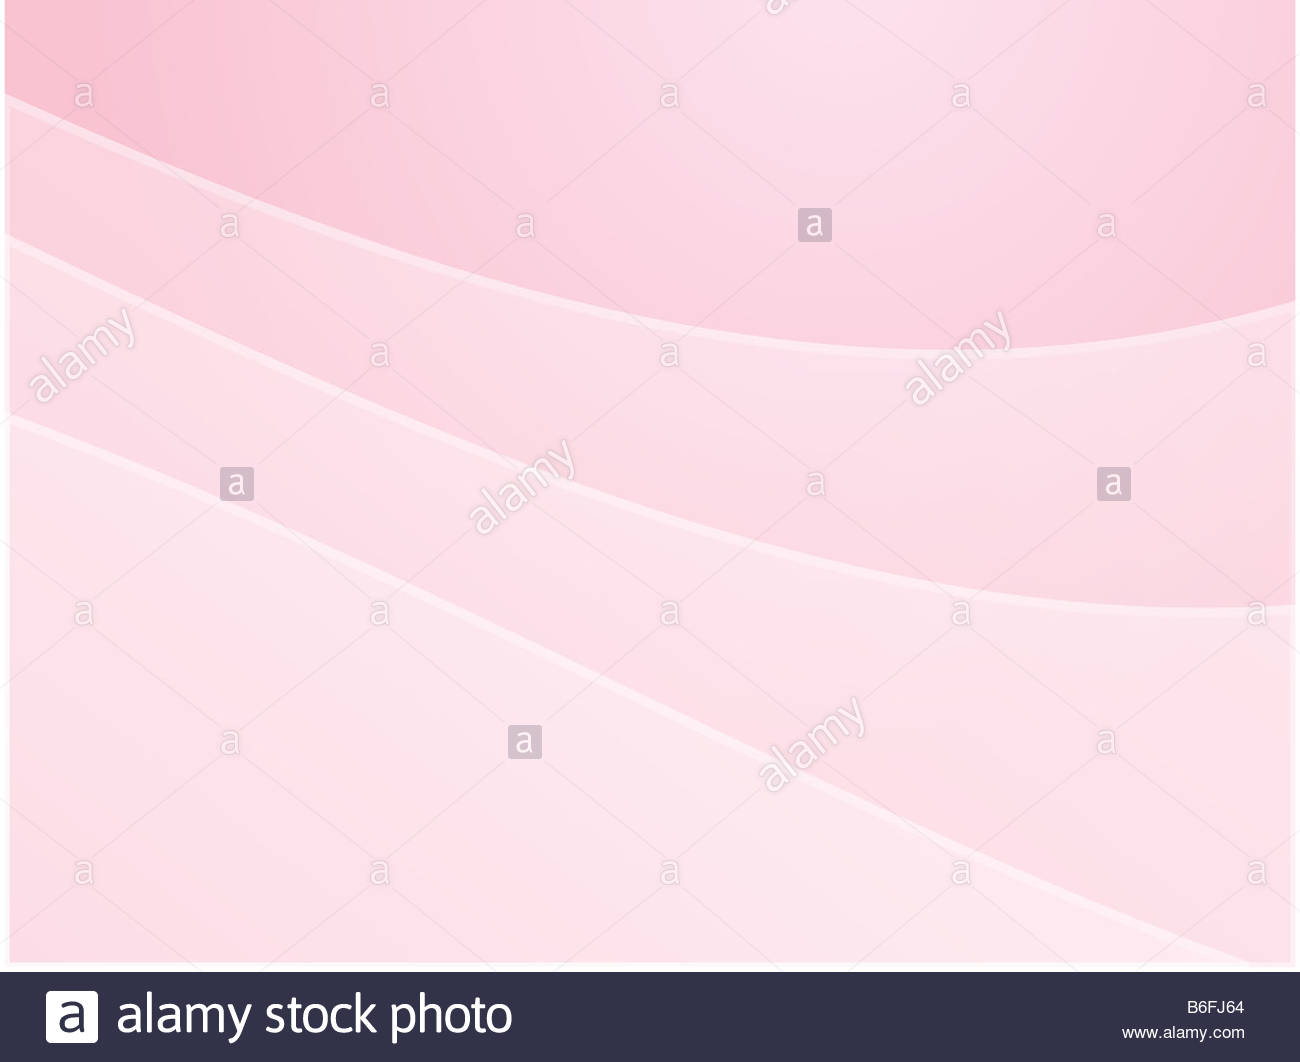 Abstract Wallpaper Design With Smooth Curves Of Color Gradients